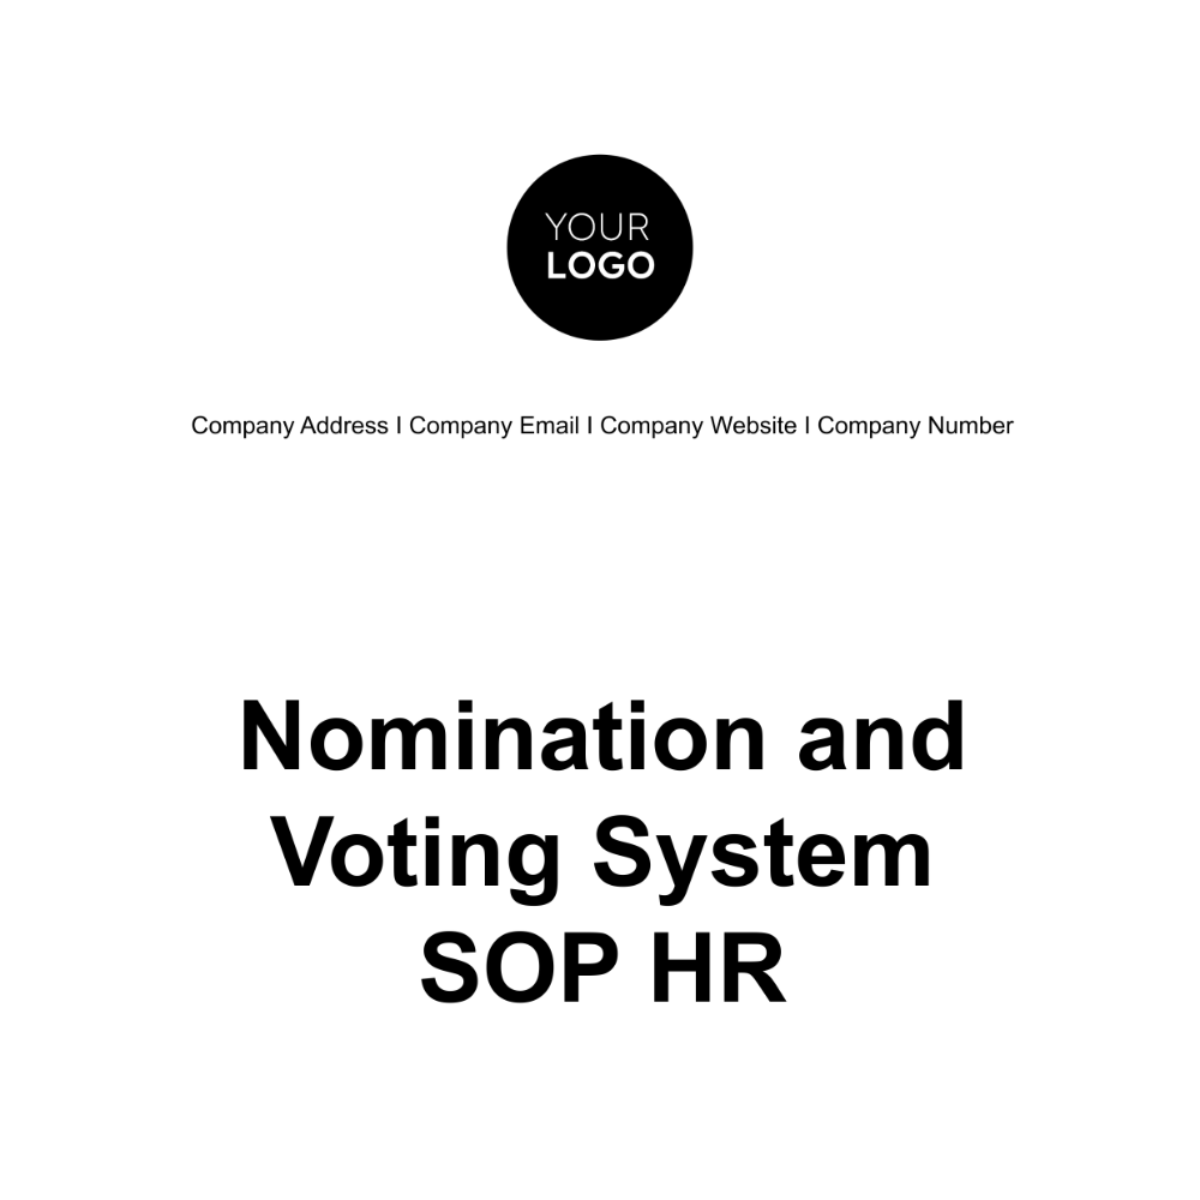 Nomination and Voting System Standard Operating Procedure (SOP) HR Template